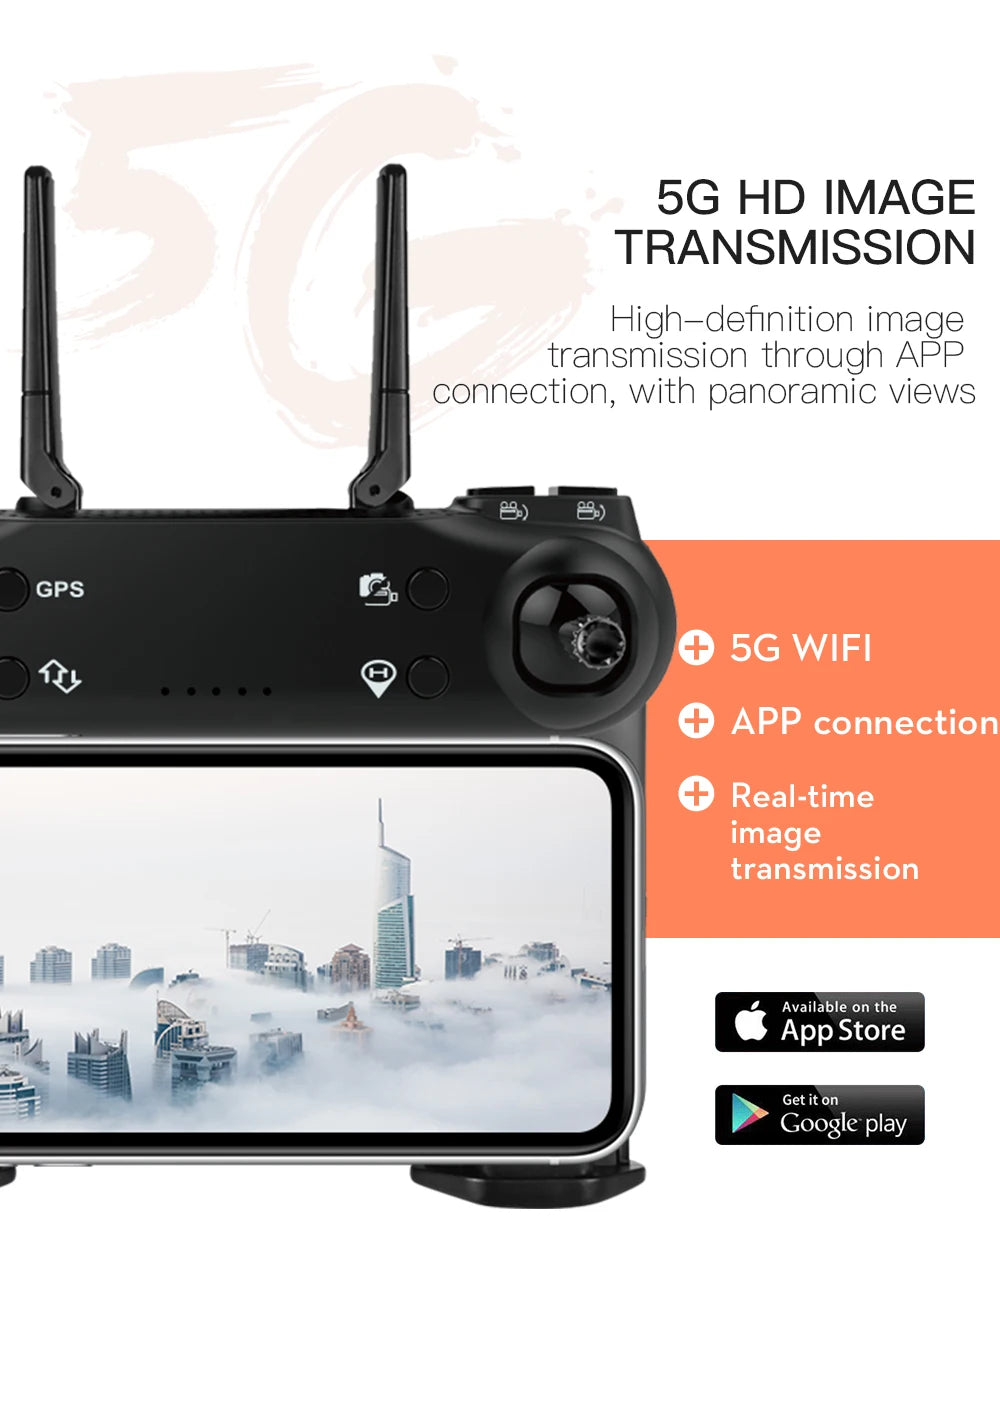 G108 Pro MAx Drone, GPS 5G WIFI APP connection Real-time image transmission Available on the Store Get Google